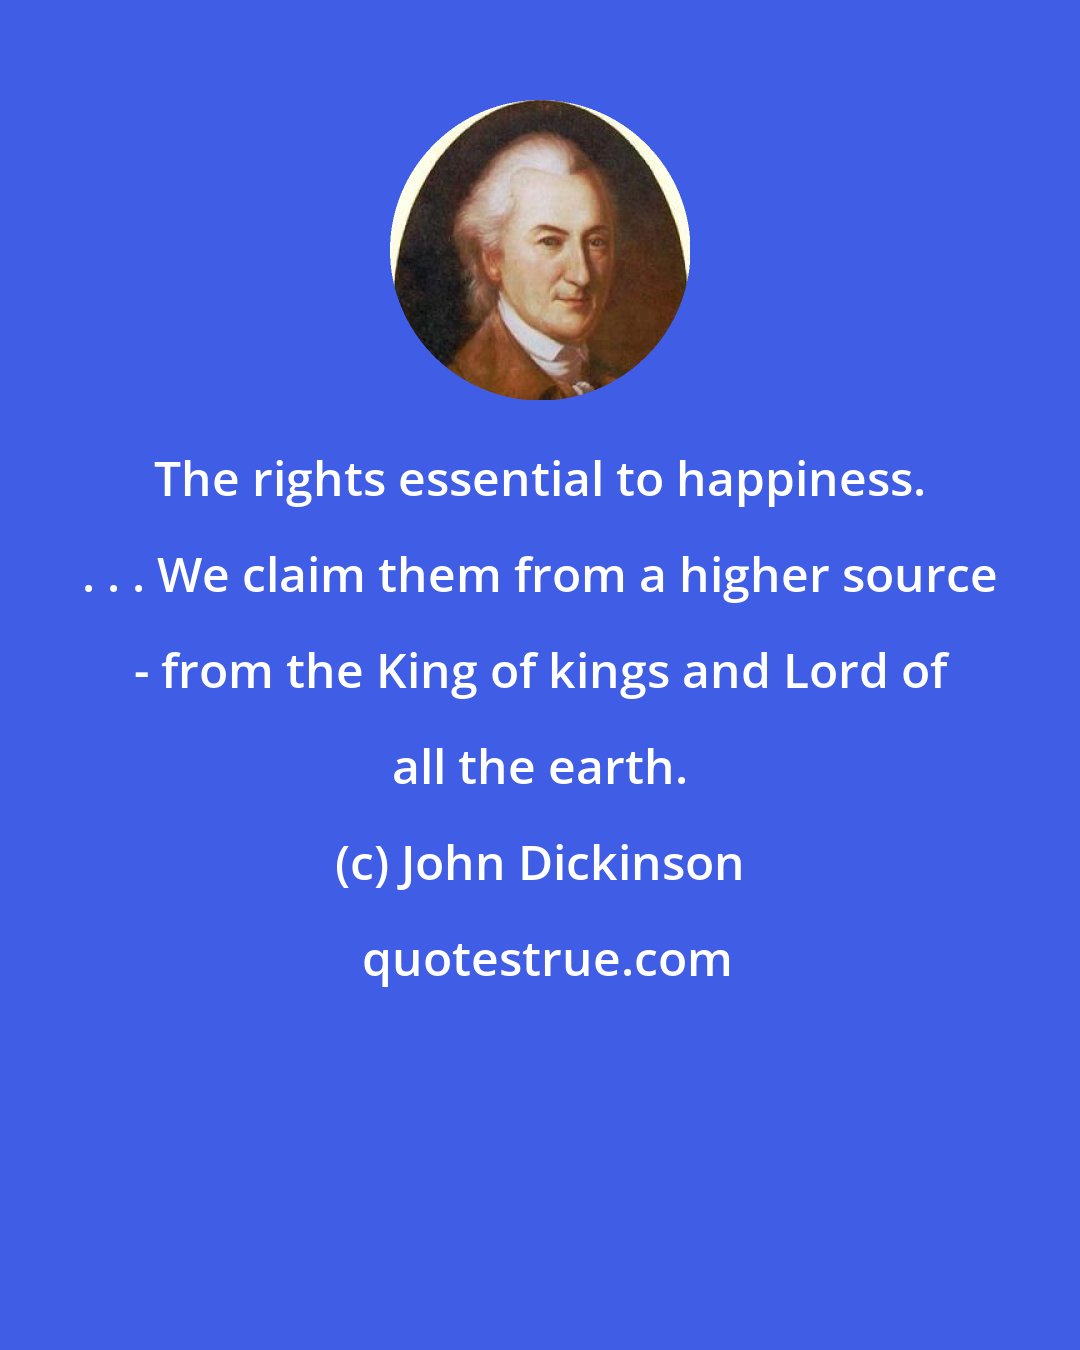 John Dickinson: The rights essential to happiness. . . . We claim them from a higher source - from the King of kings and Lord of all the earth.